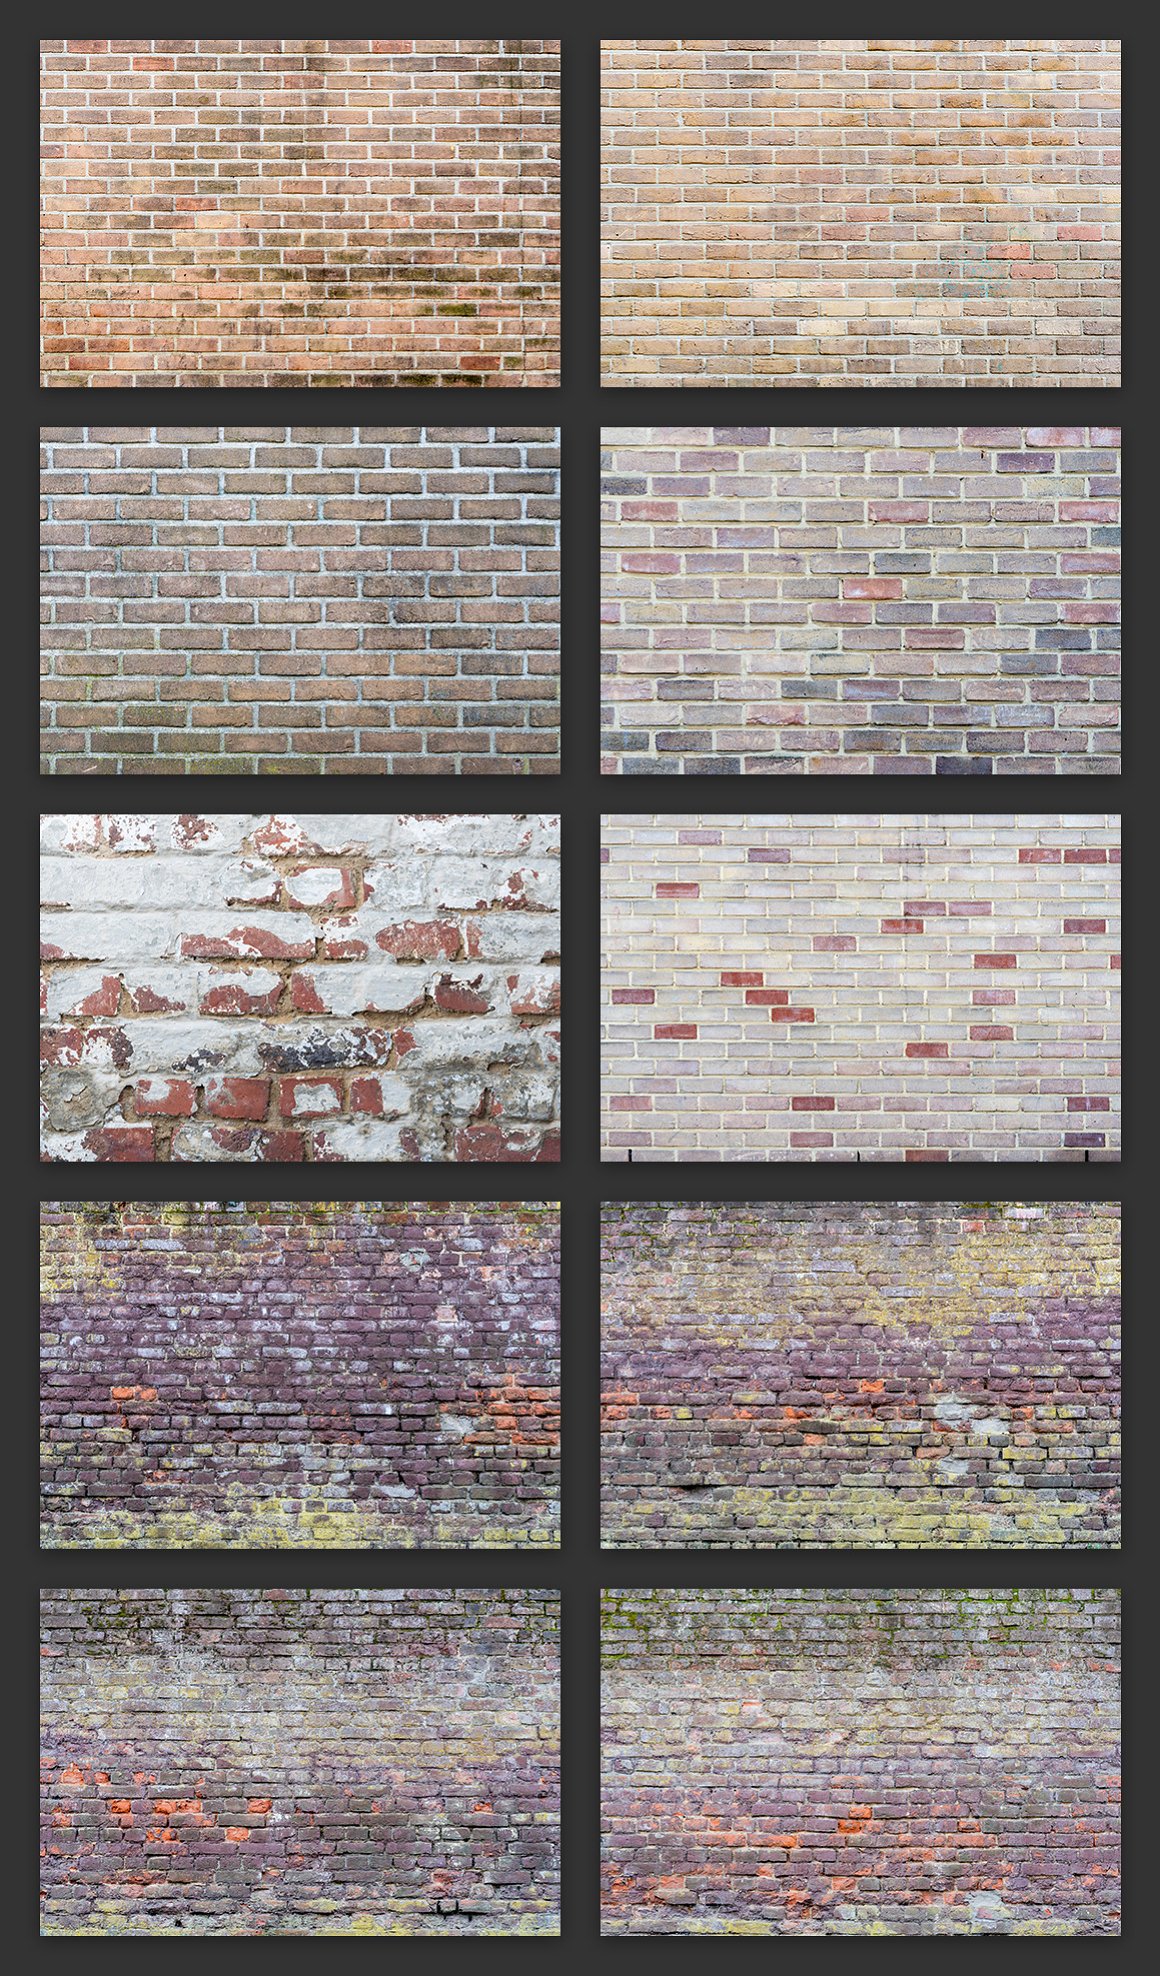 Modern bricks for your wall.